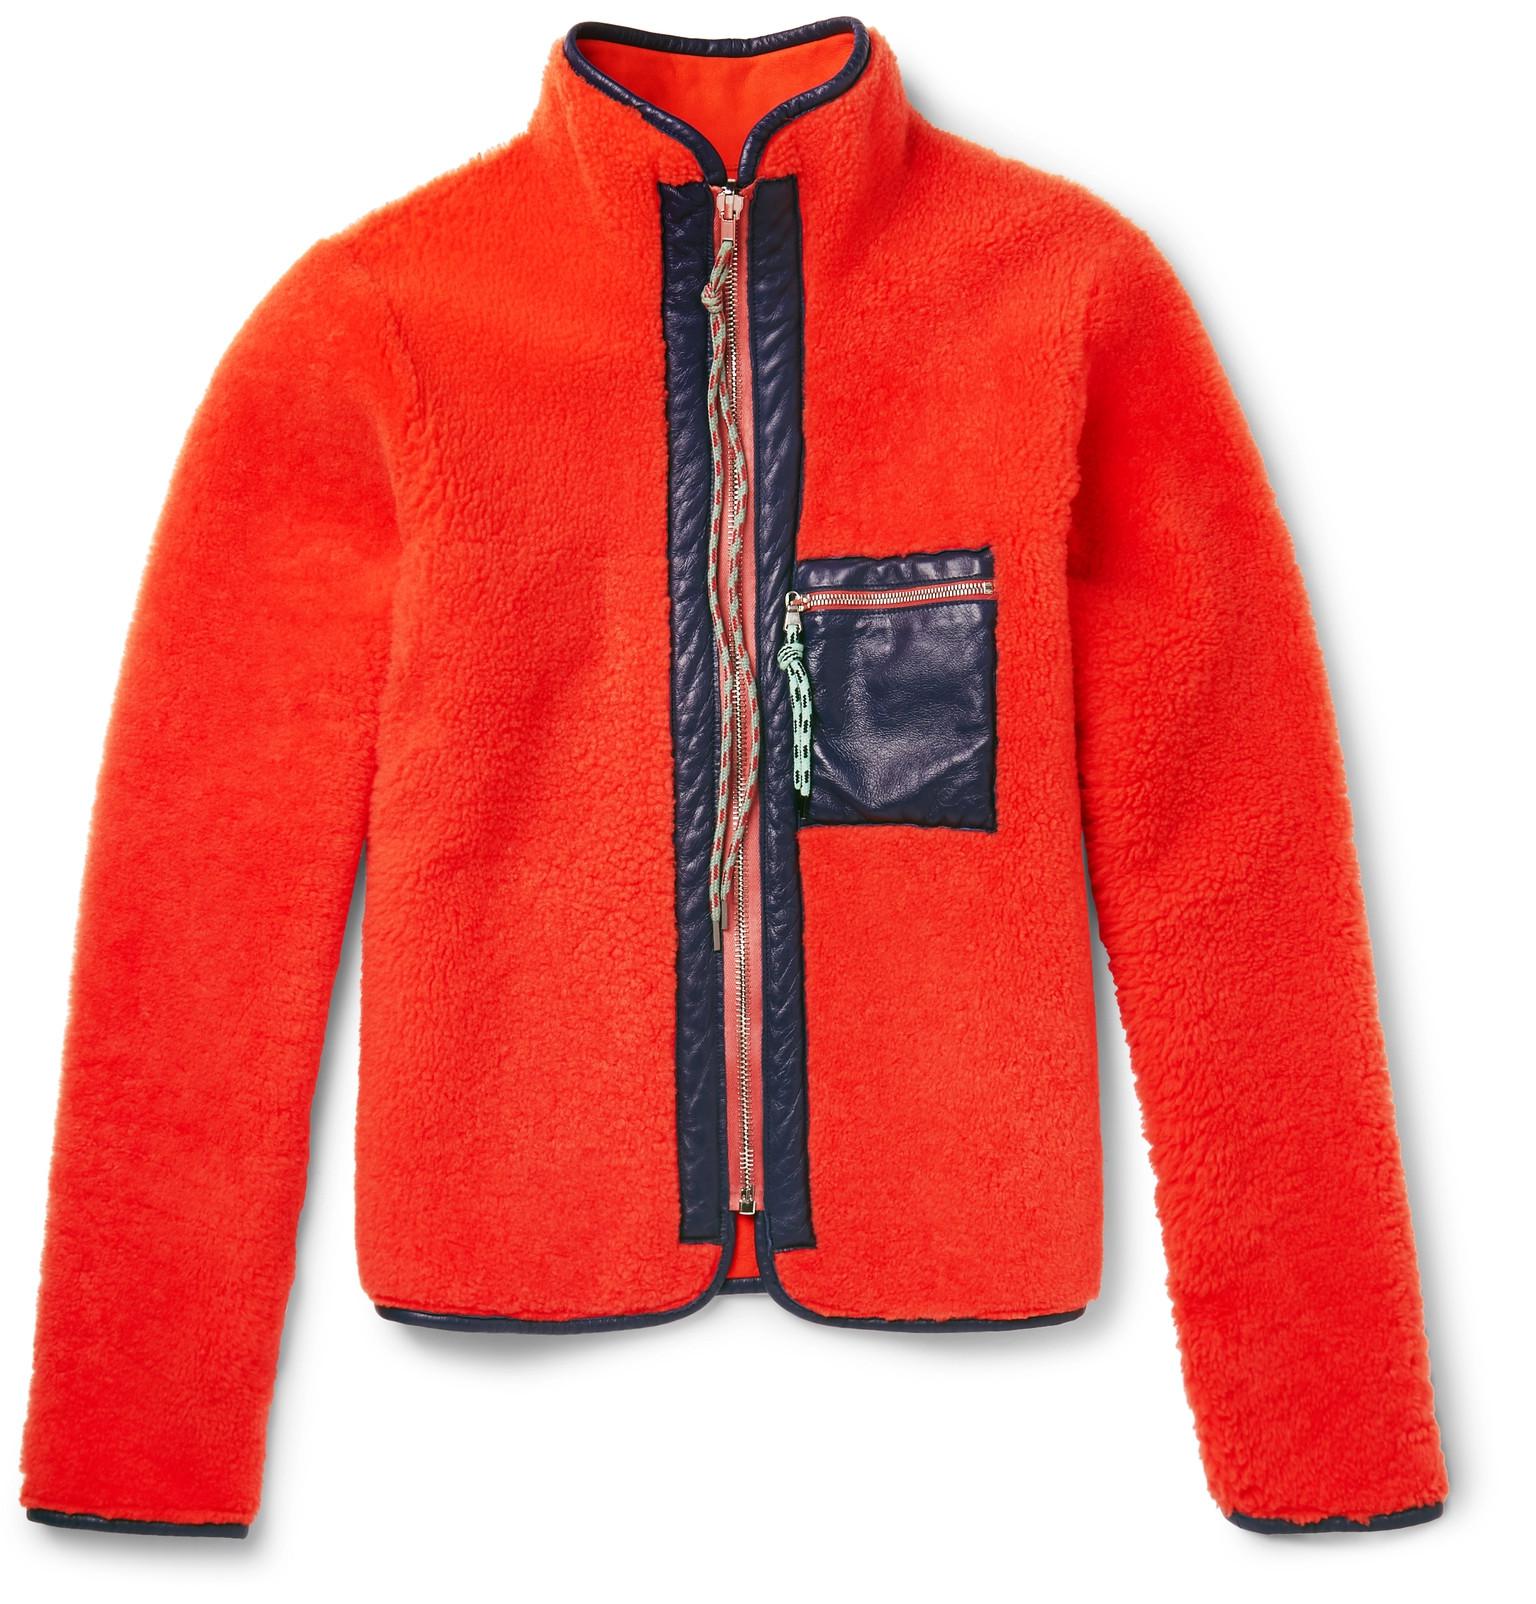 Aries Pat's Leather-trimmed Shearling Jacket in Orange for Men - Lyst